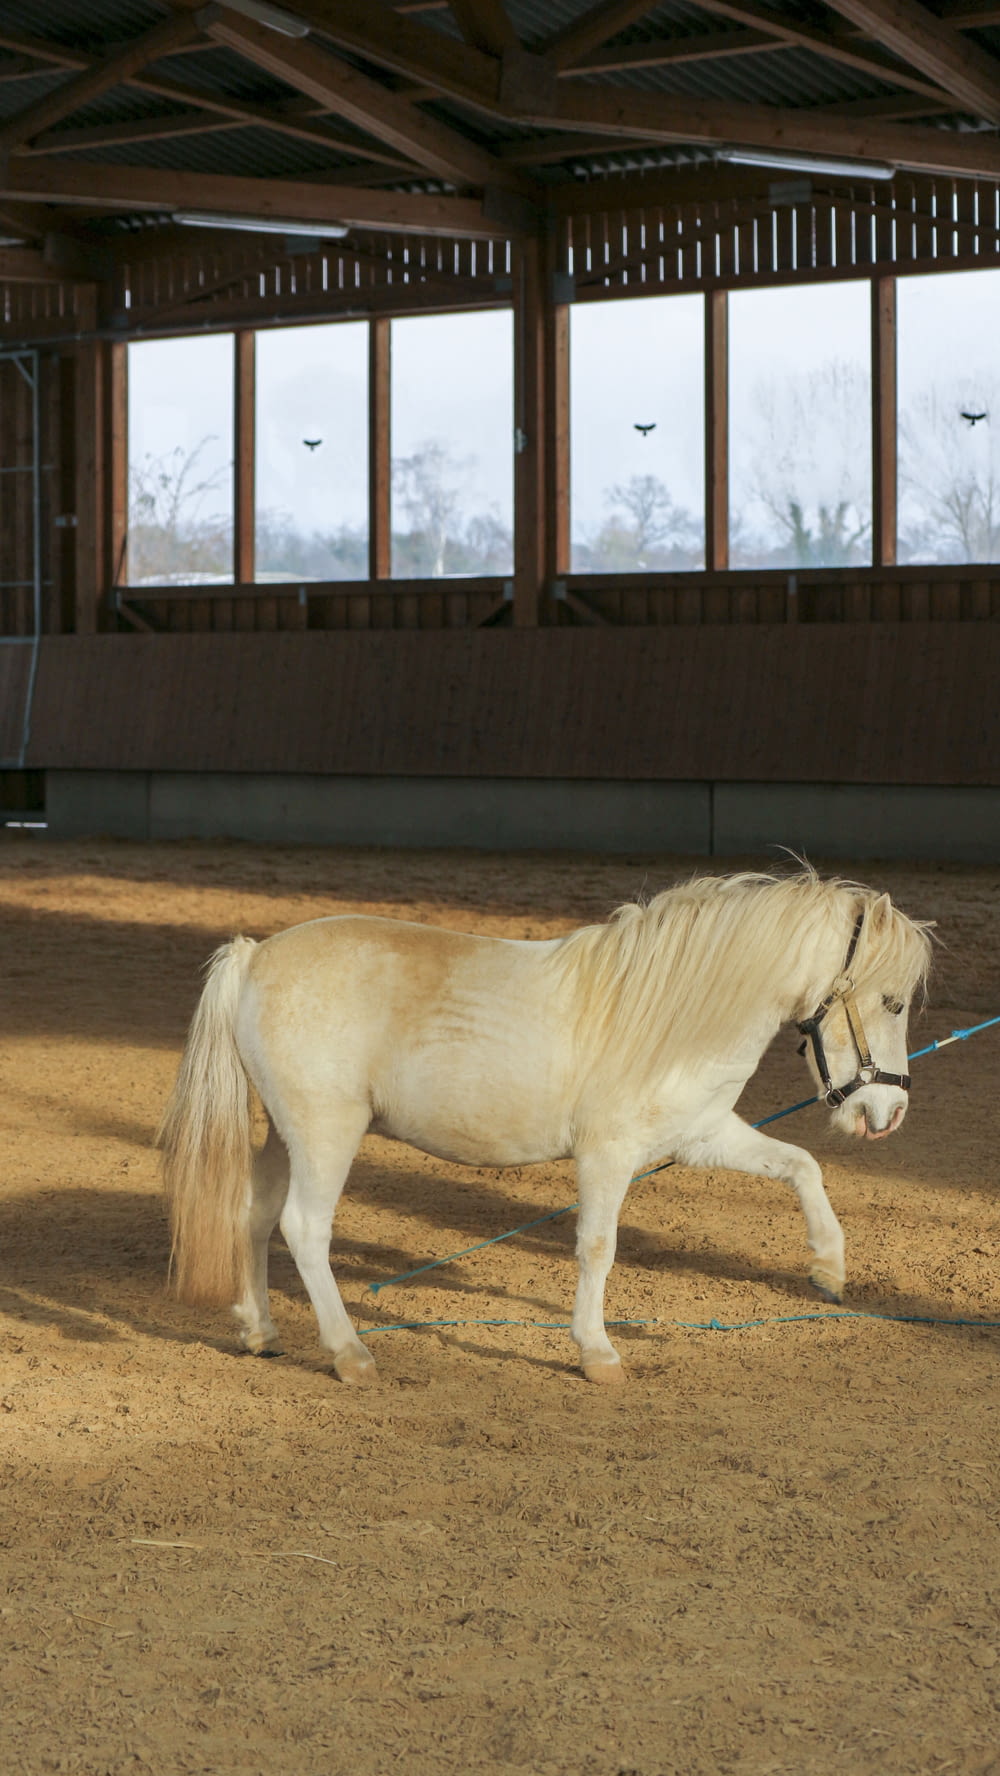 a white horse is walking in an enclosed area